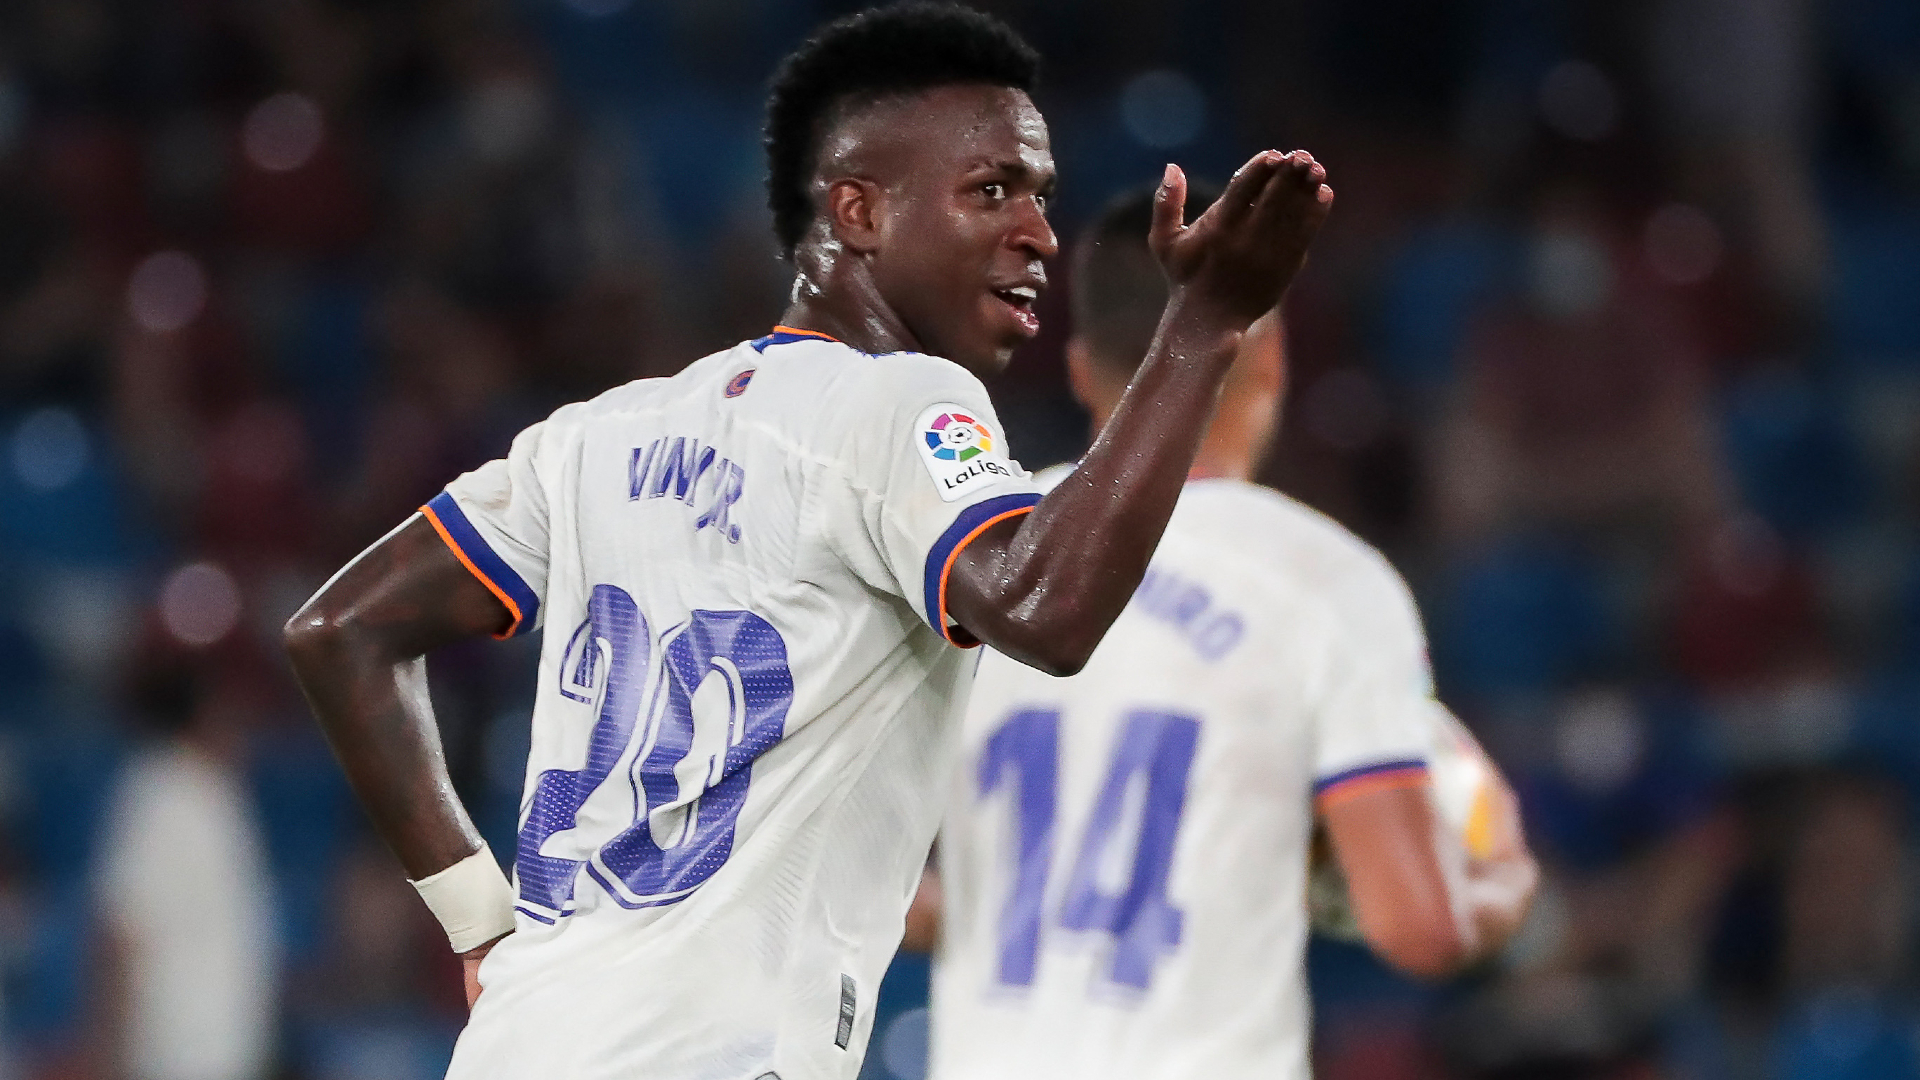 Vinicius Jr One Of The Lowest Paid Members Of Real Madrid's Squad And No New Contract Talks Yet